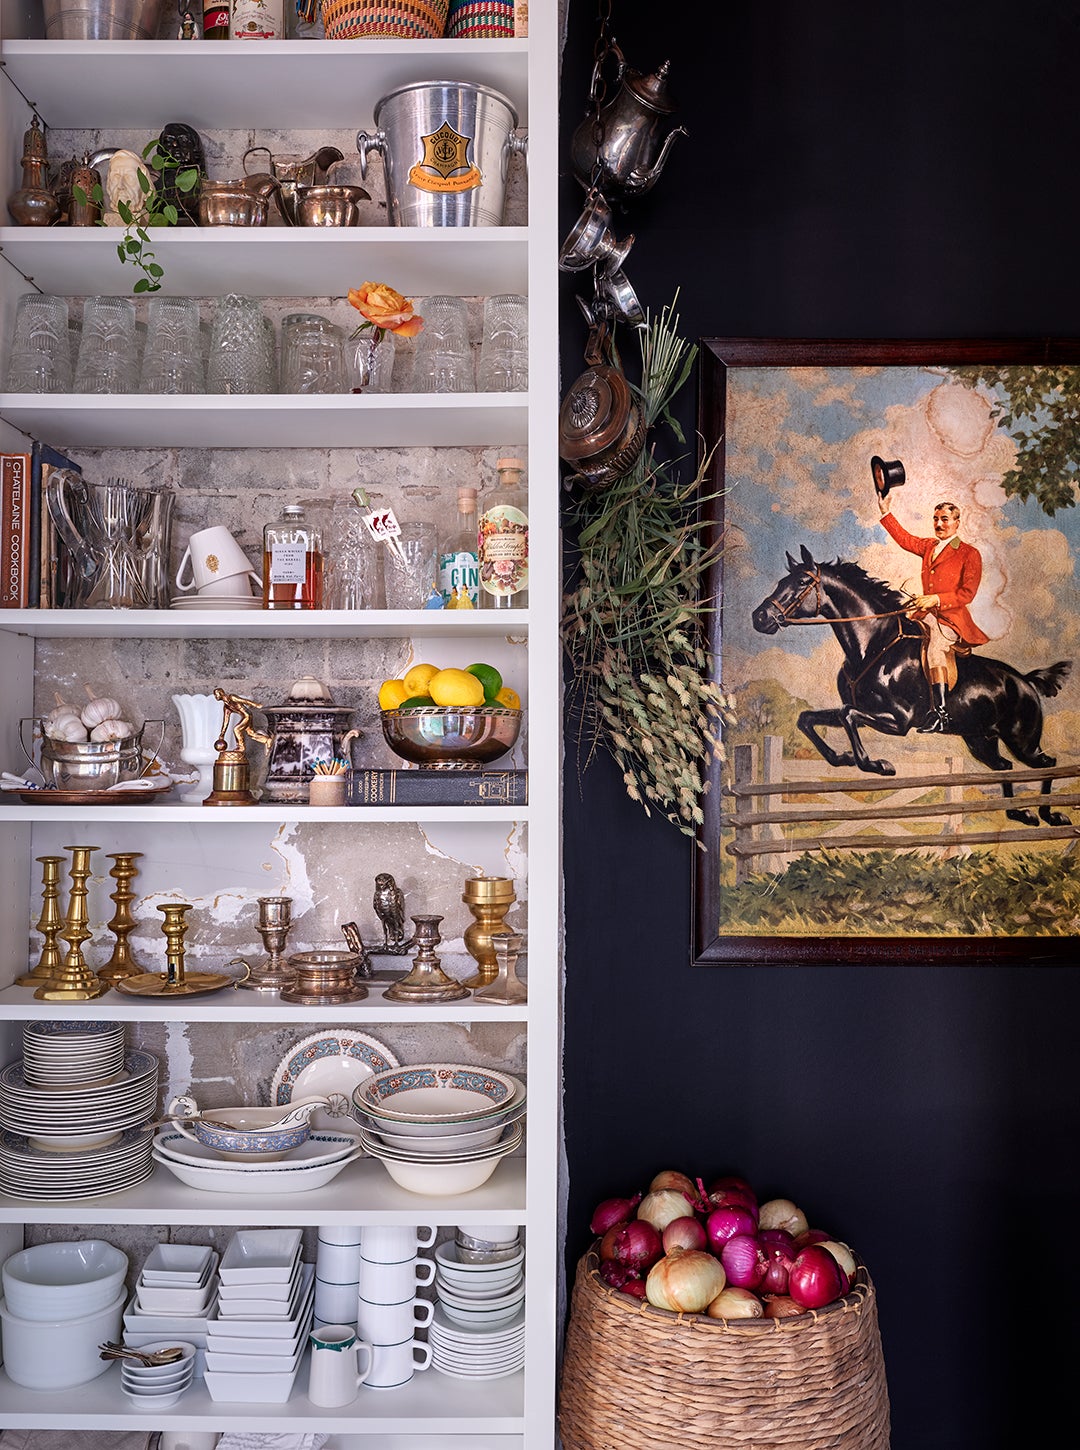 shelves stocked with vintage dishes